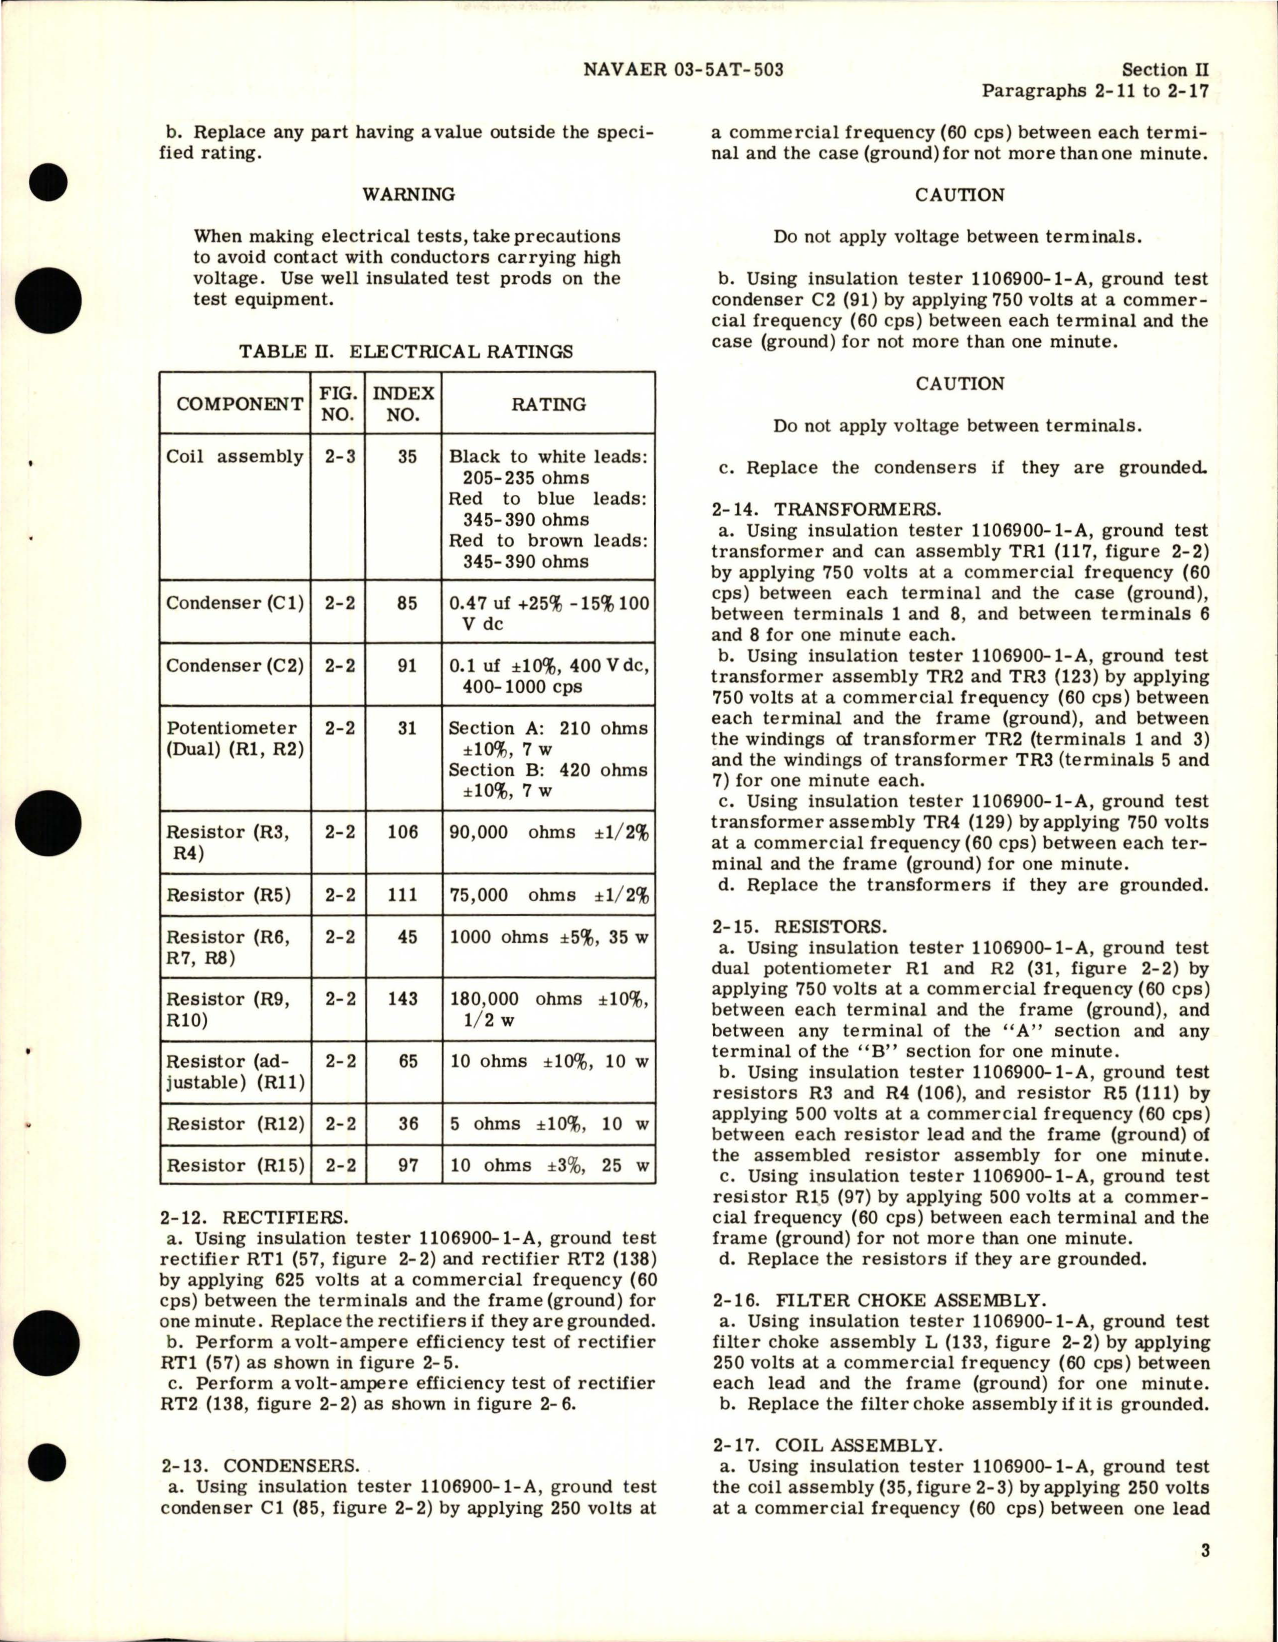 Sample page 7 from AirCorps Library document: Overhaul Instructions for Voltage Regulator and Mounting Base Assembly - Type 40E44-1-A 